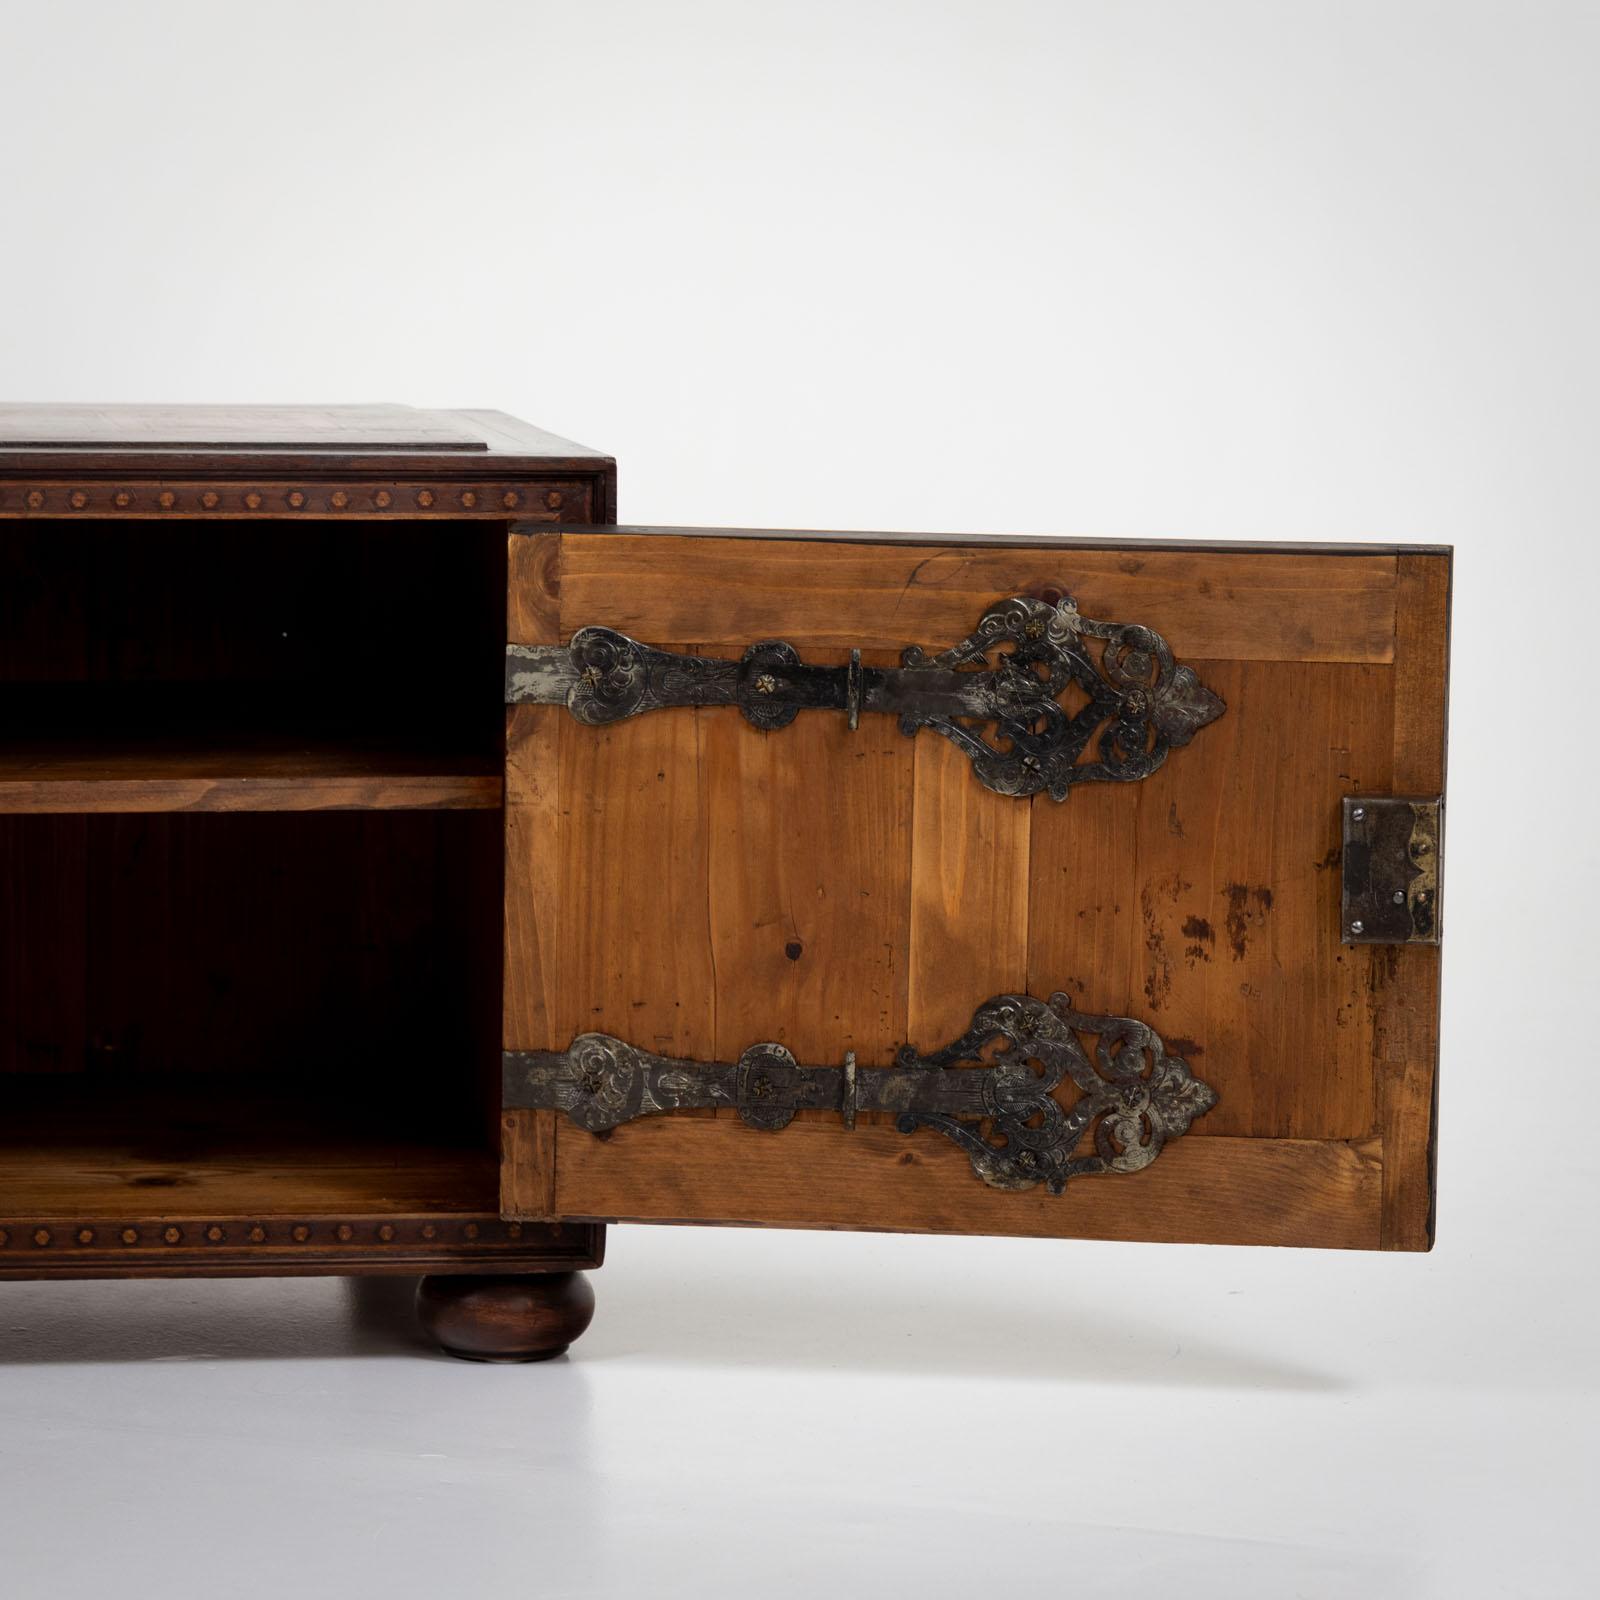 Wood Chest with Doors, late 19th century